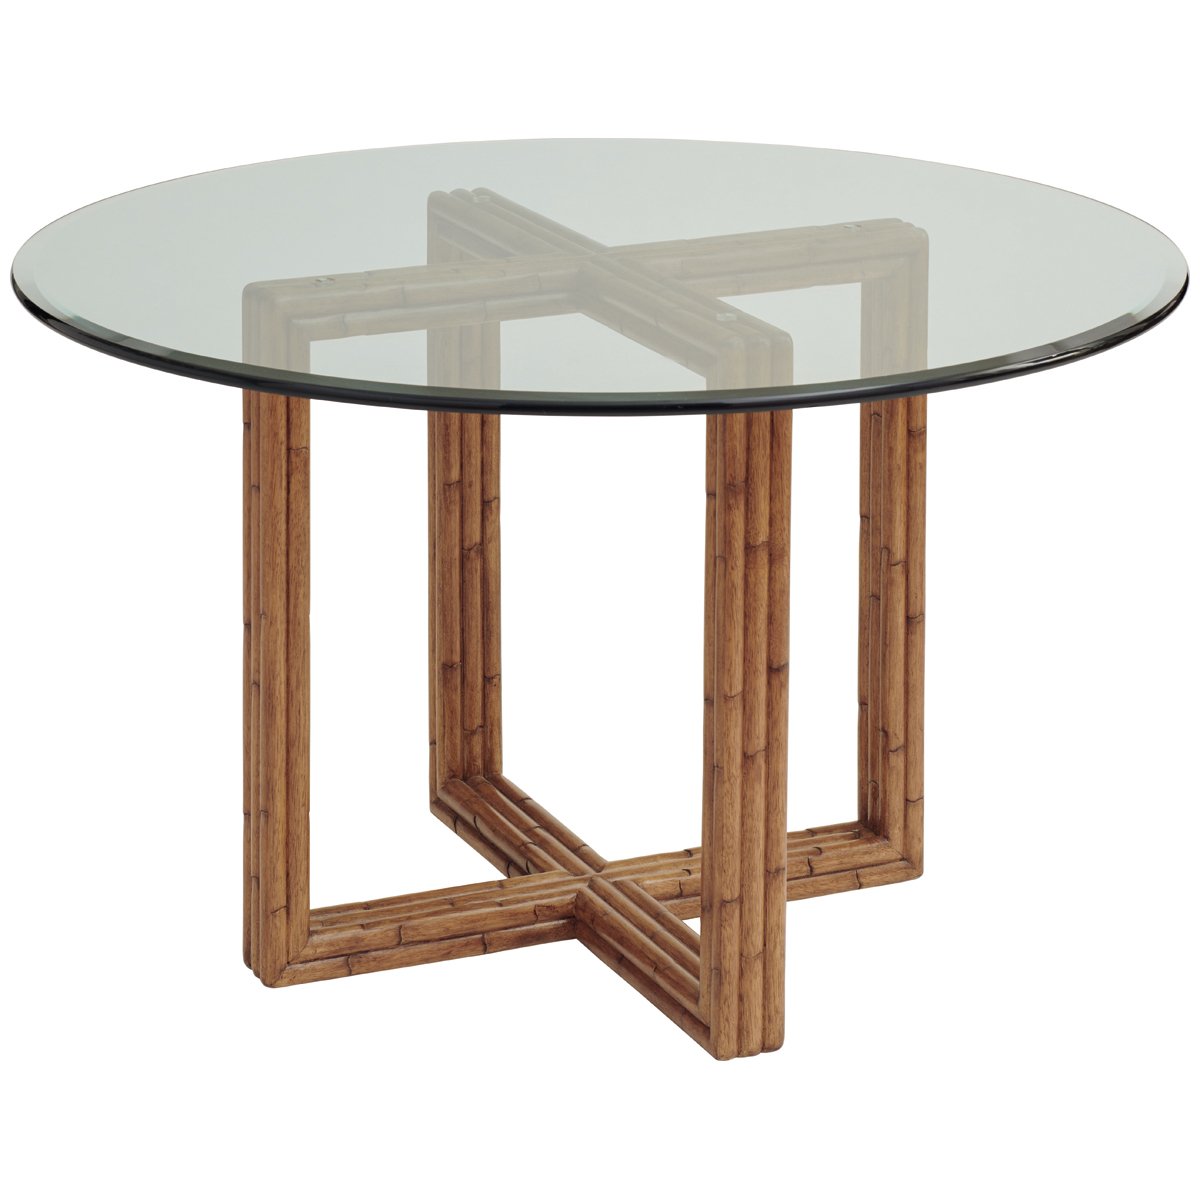 Tommy Bahama Palm Desert Sheridan Glass Top Dining Table